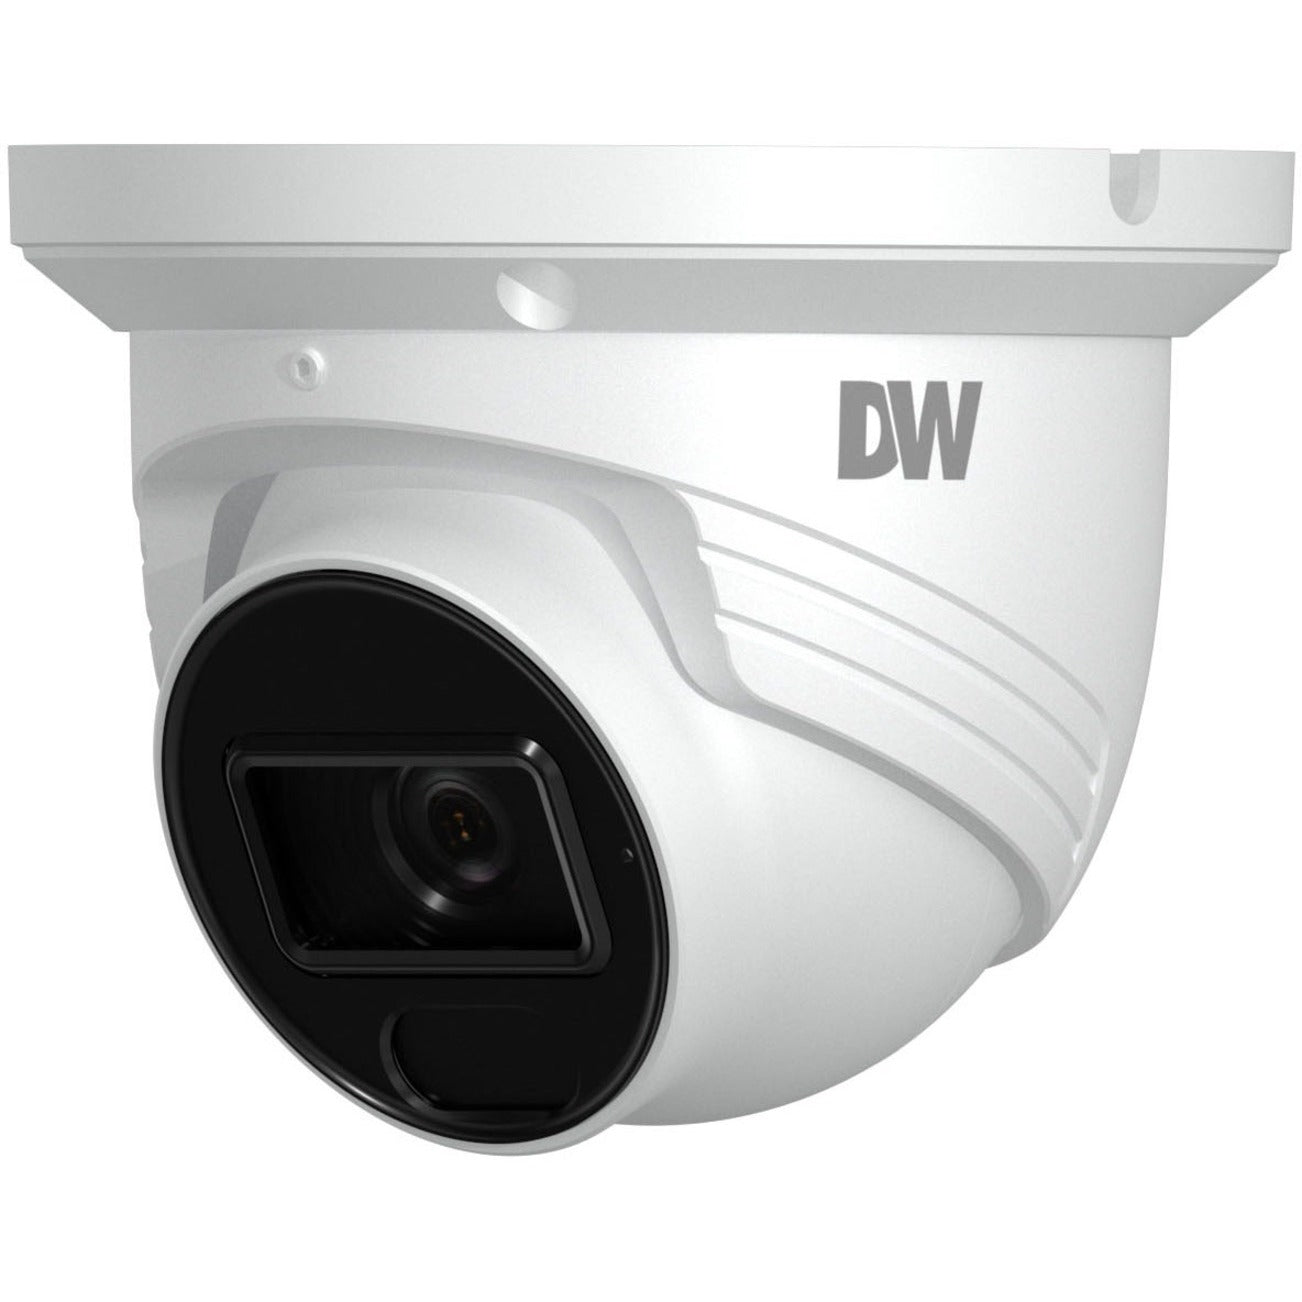 Digital Watchdog DWC-MT95WI36TW MEGApix 5MP Turret IP Camera with Fixed Lens Options and IR, 100 ft Night Vision